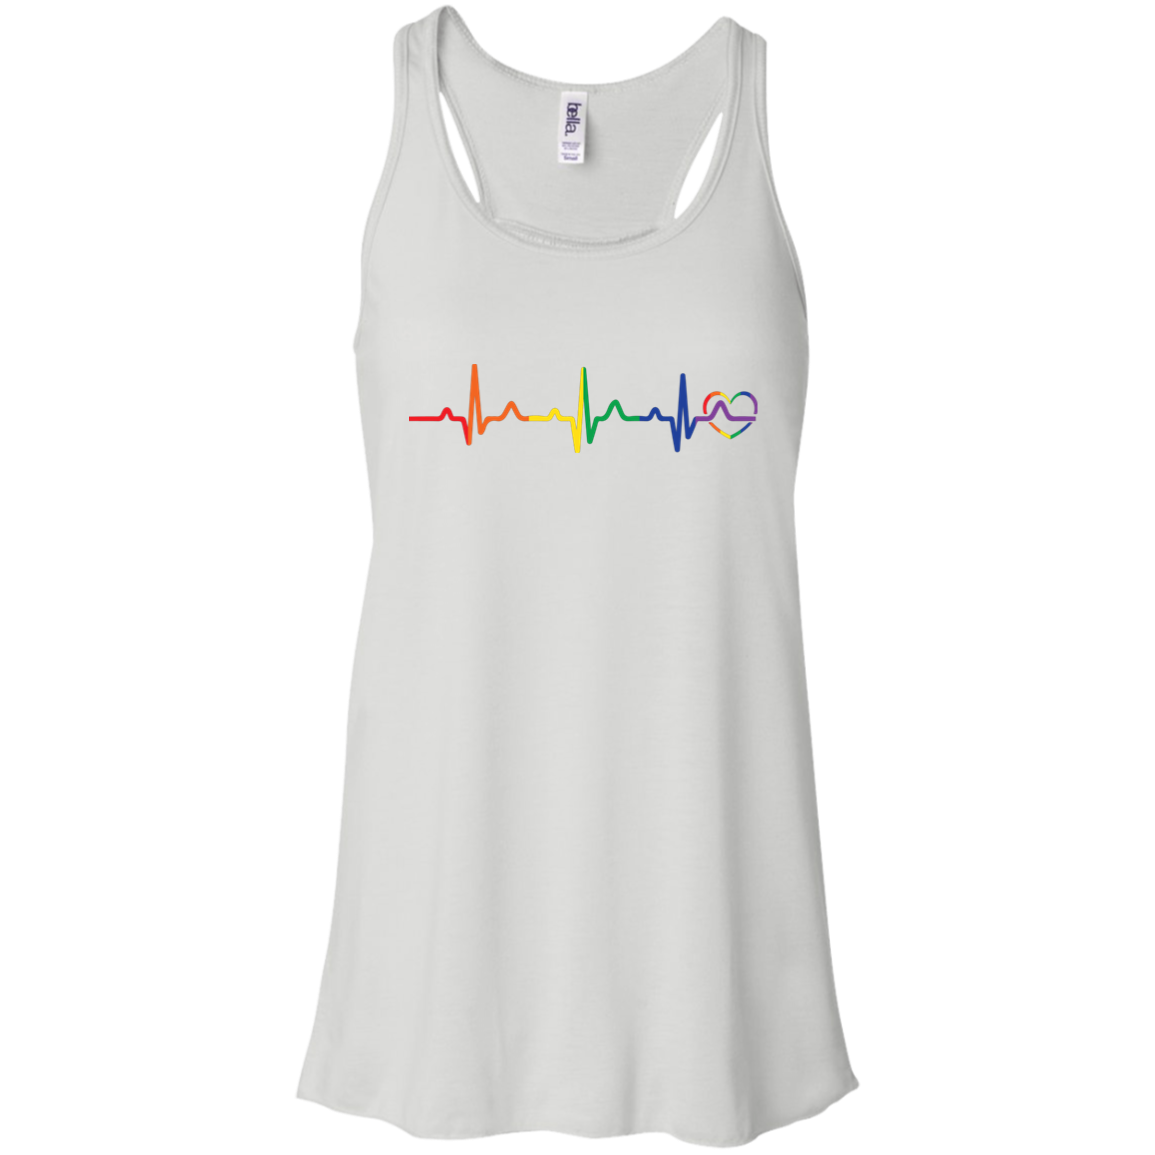 Rainbow Heartbeat white color tank top for women